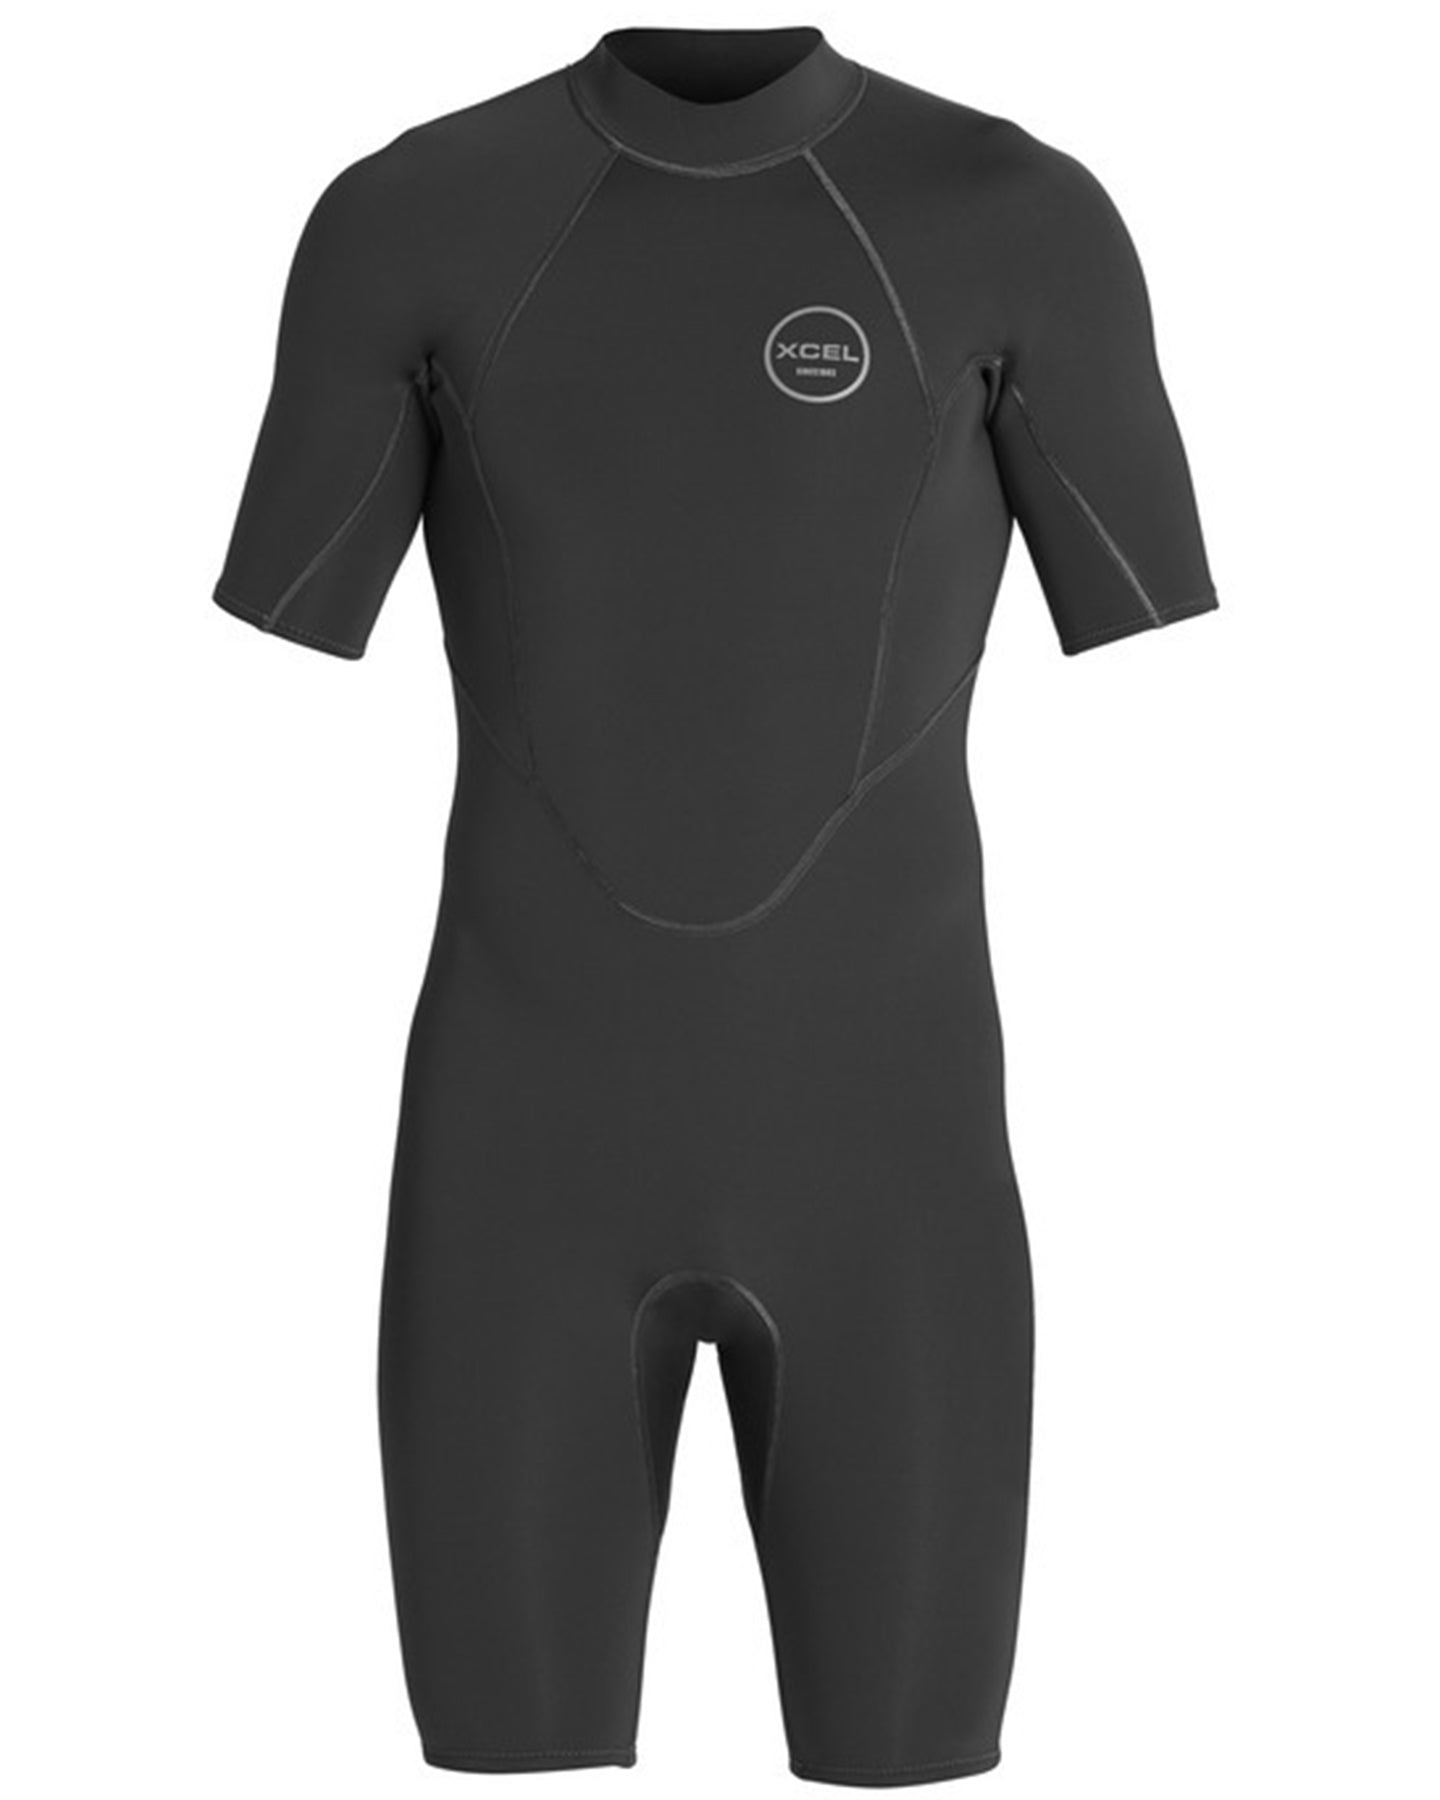 MENS AXIS X 2MM S/S SPRINGSUIT - Board Store XcelWetsuits  